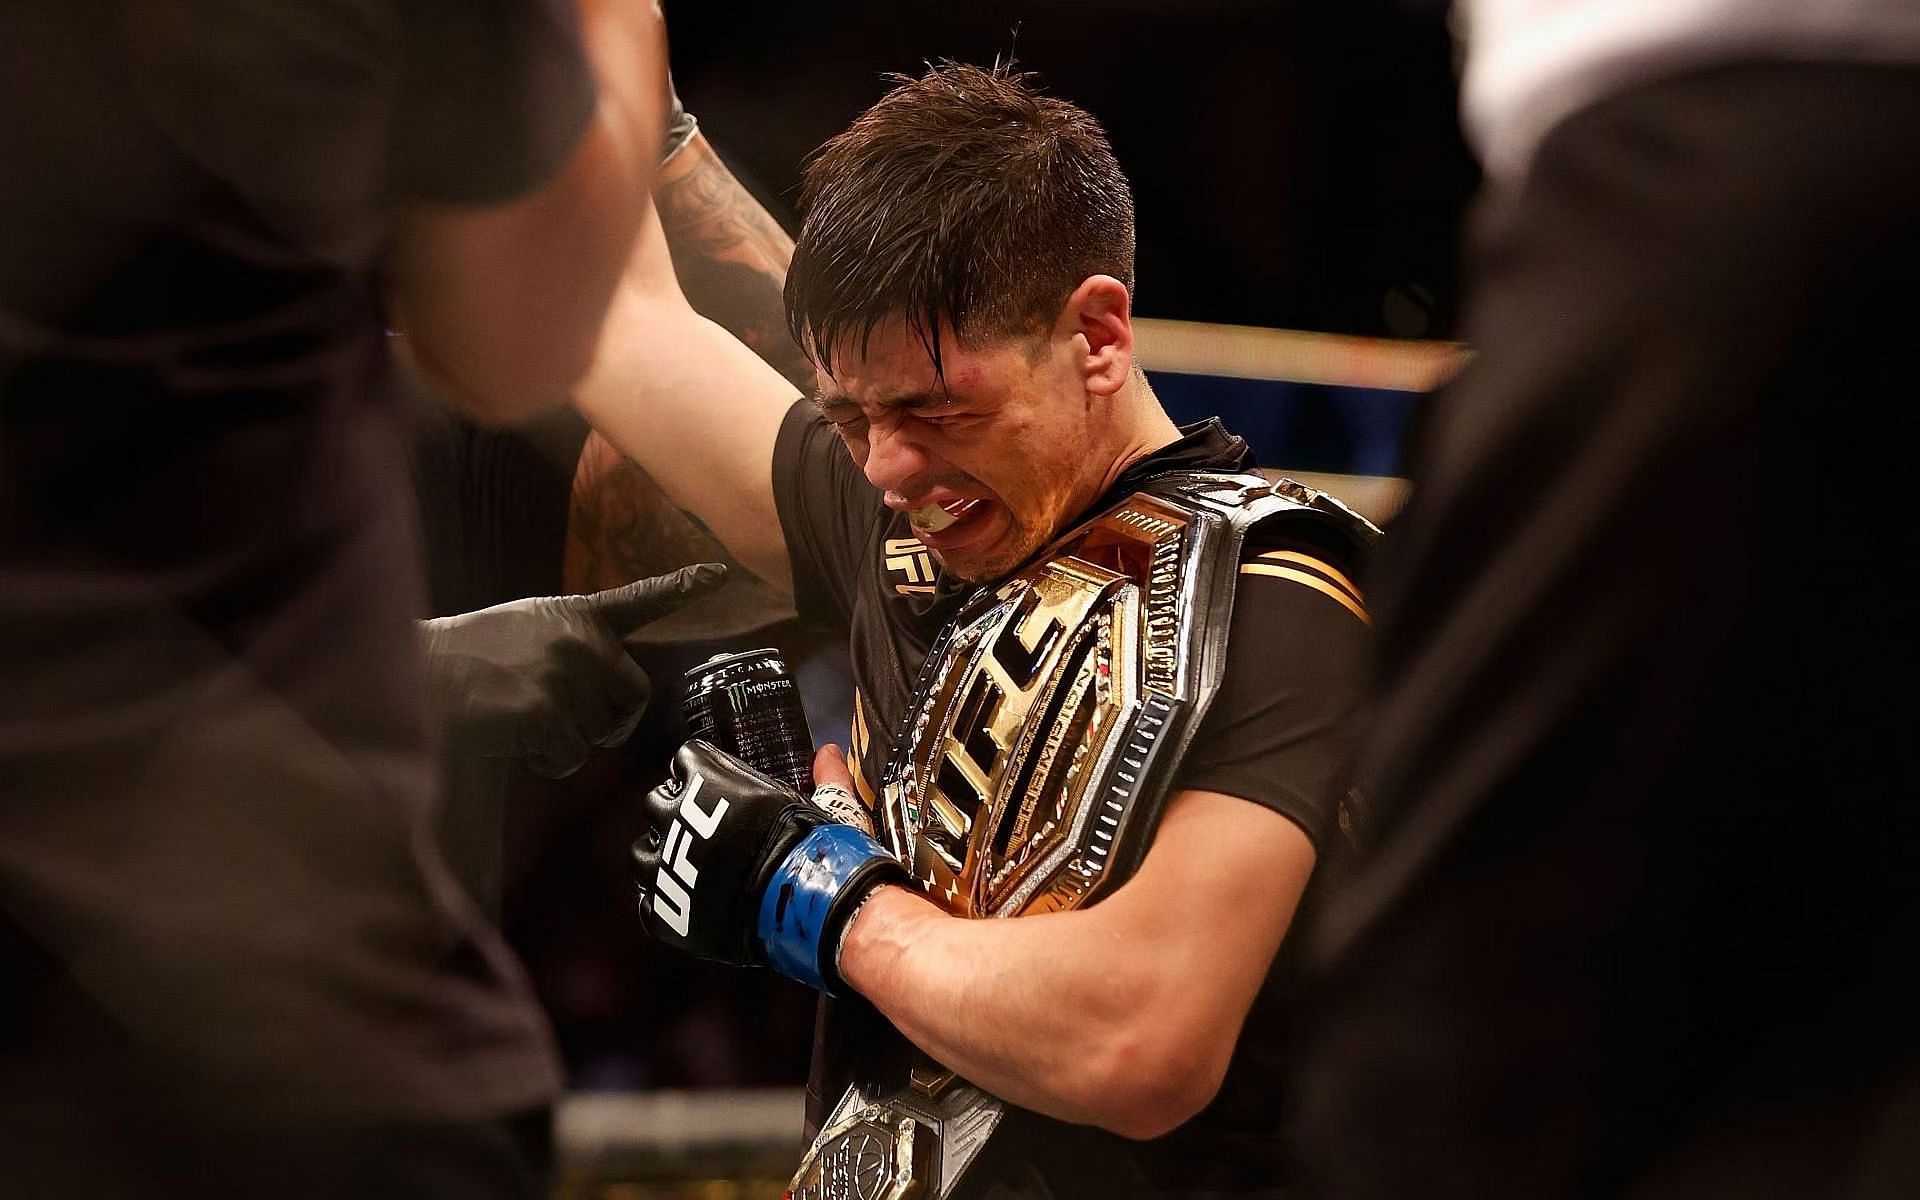 Brandon Moreno will have his hands full at UFC 290 [Image Credit: Getty]